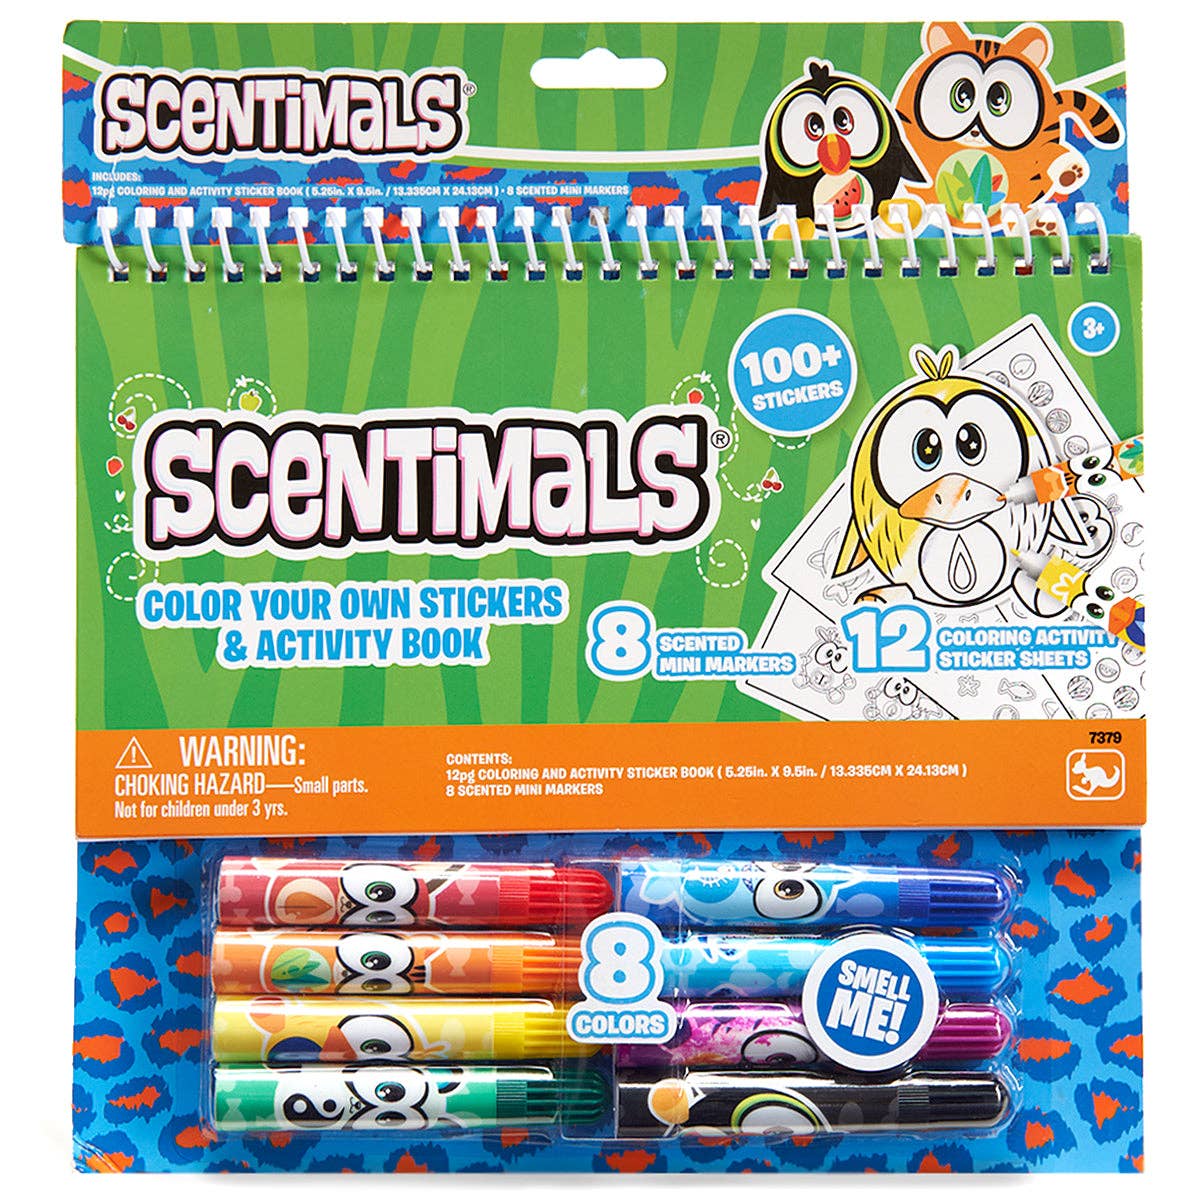 Scentimals Color You Own Stickers & Activity Book